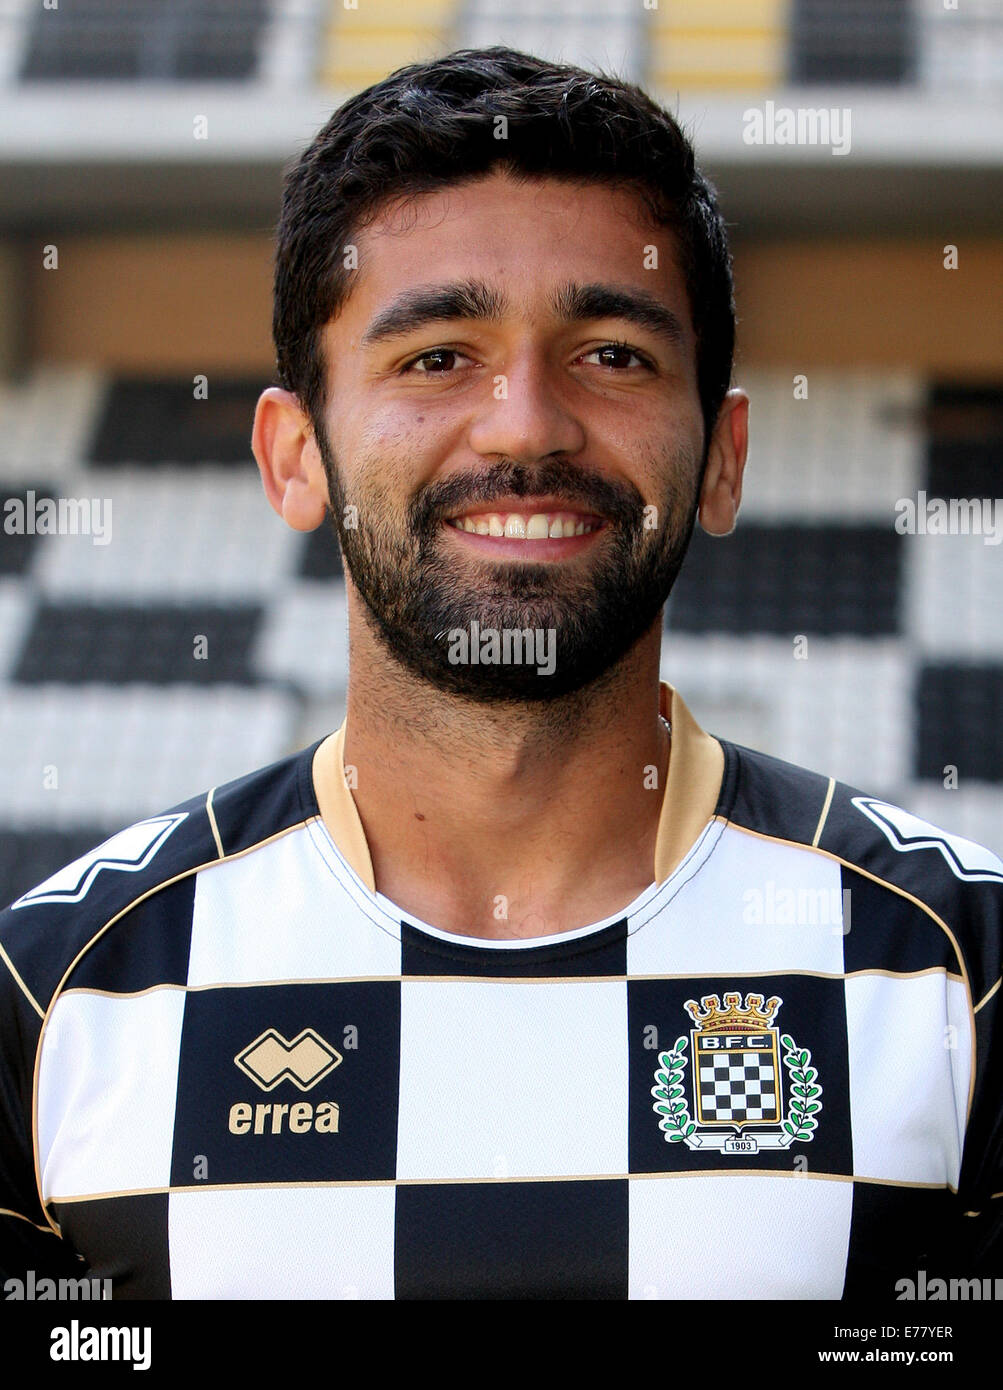 Diego Da Costa Lima High Resolution Stock Photography And Images Alamy